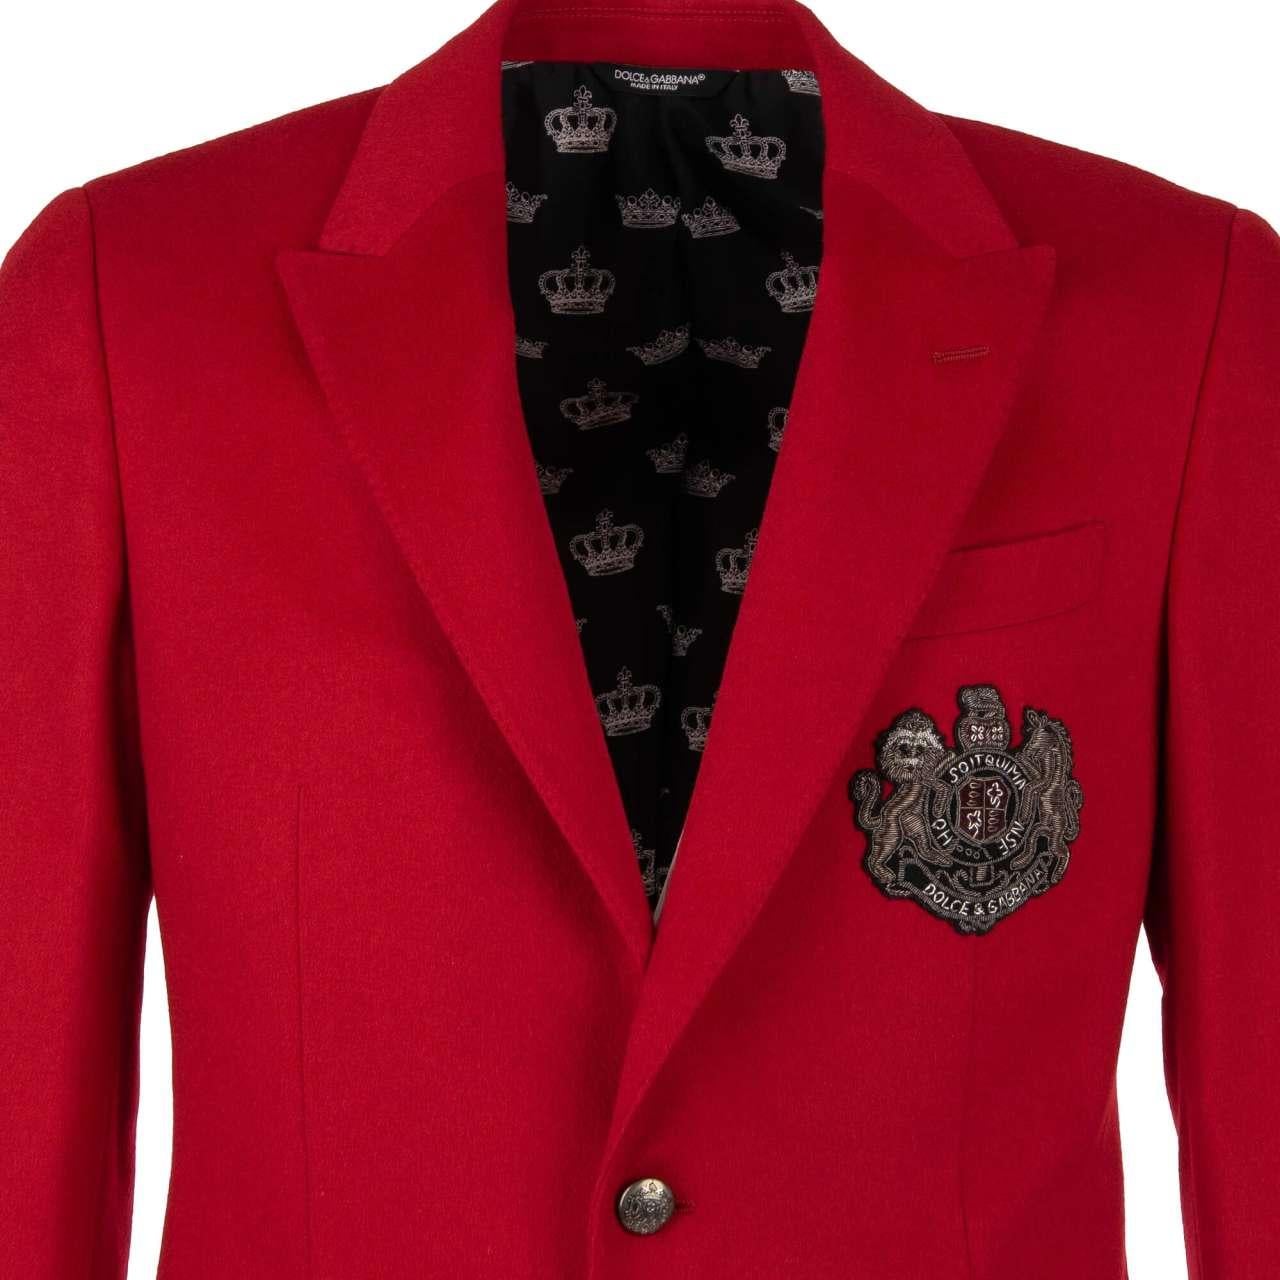 - Cashmere blazer with embroidered logo coat of arms and metal buttons by DOLCE & GABBANA - Former RRP: EUR 3.250 - MADE IN ITALY - New with Tag - Slim Fit - Model: G2IS6Z-GE568-R2254 - Material: 100% Cashmere - Lining: 61% Nylon, 39% Silk -